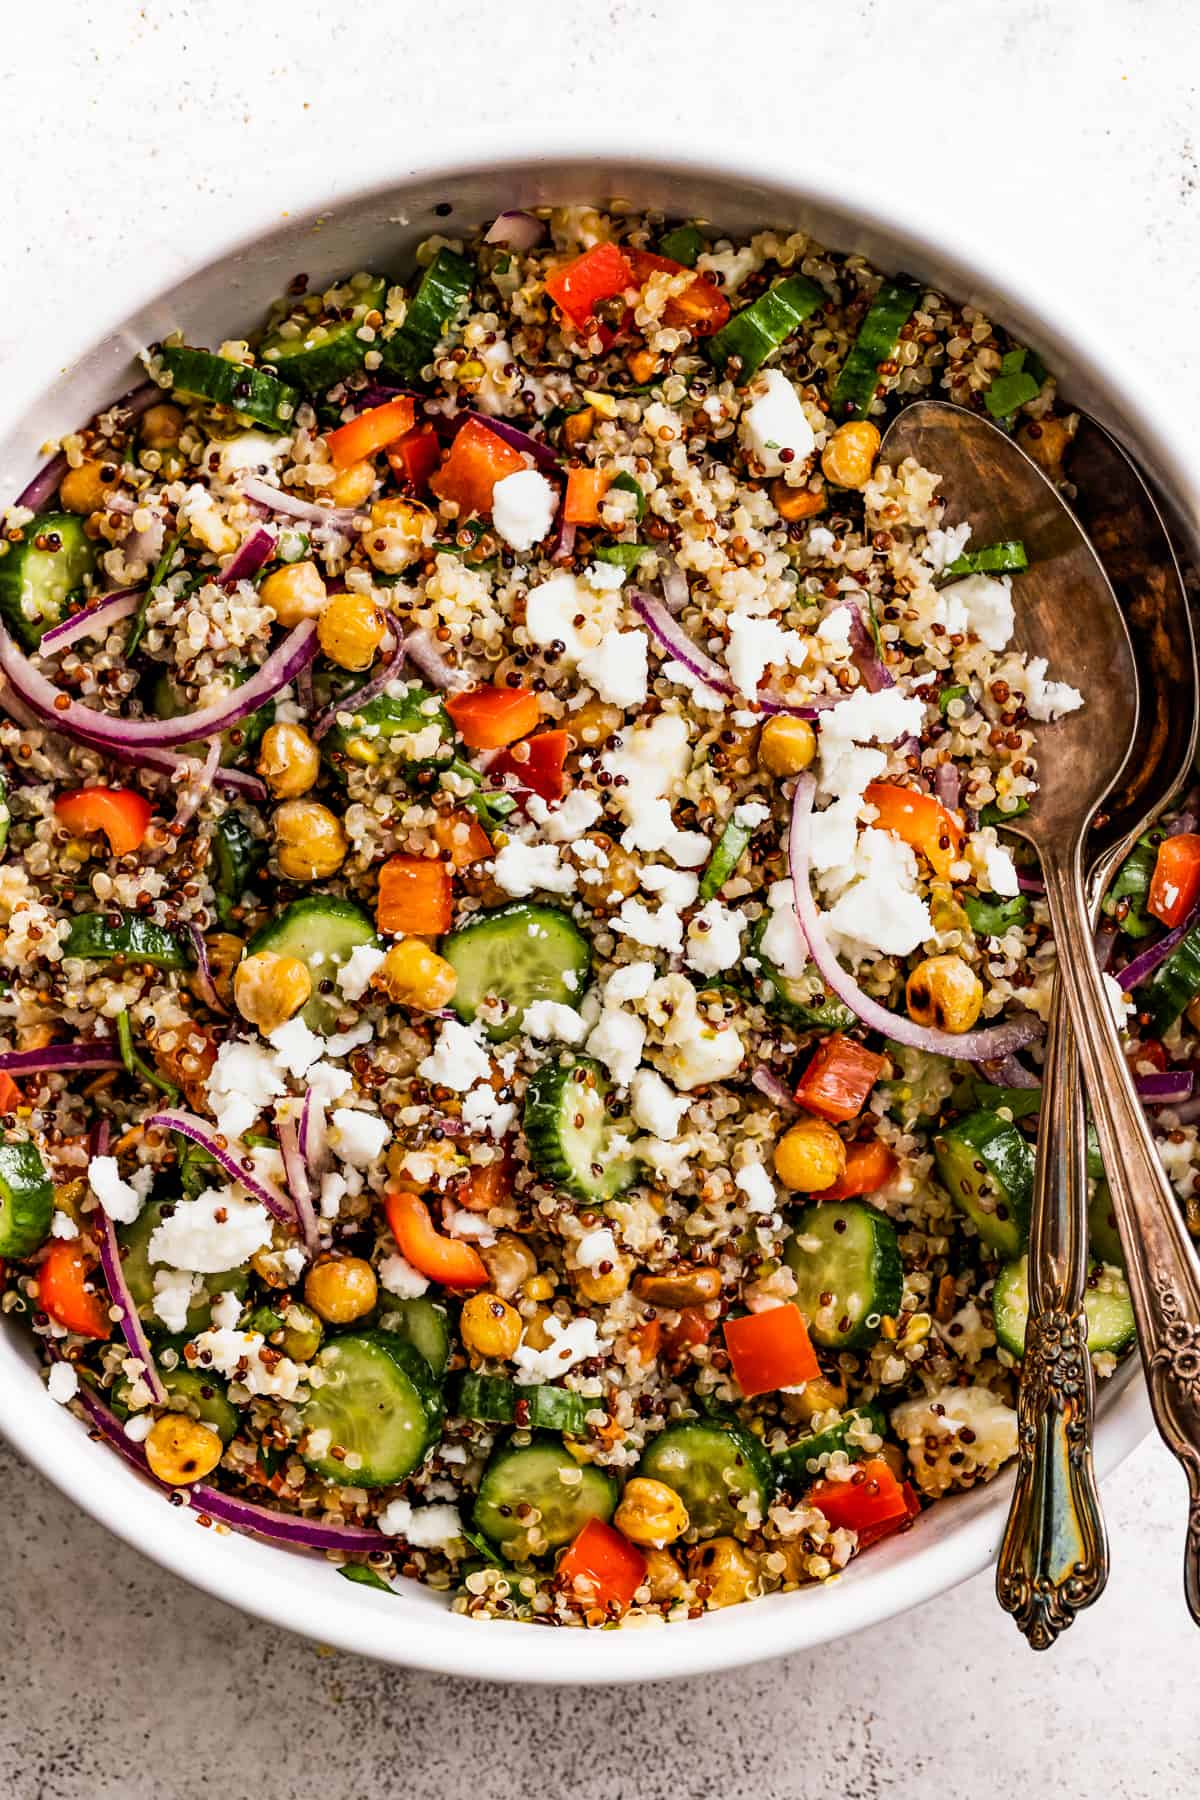 A bowl with Tri-color quinoa salad tossed with crunchy chickpeas and drizzled with homemade dressing.